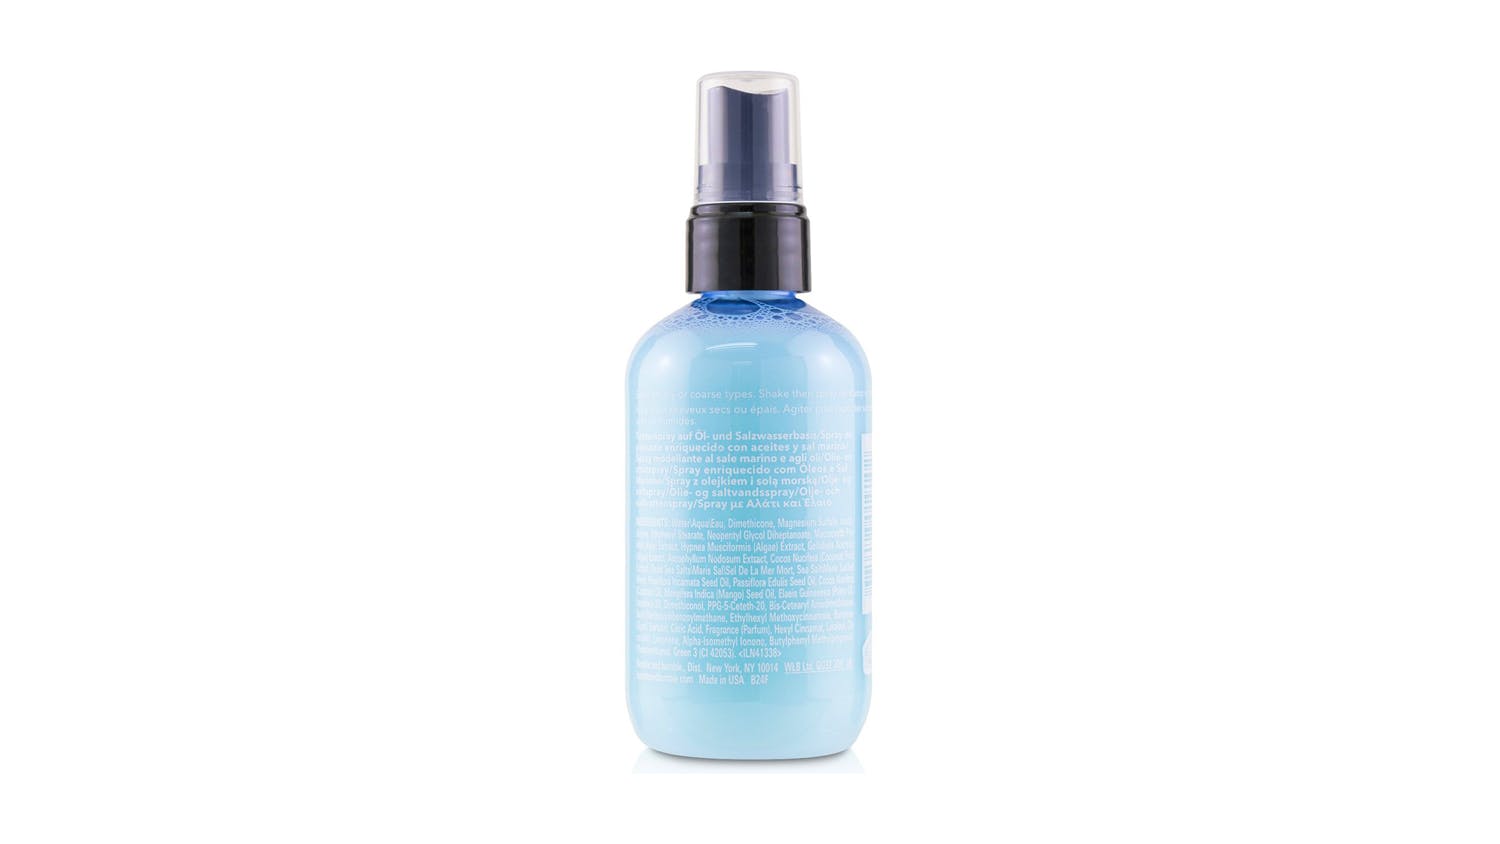 Bumble and Bumble Surf Infusion (Oil and Salt-Infused Spray - For Soft, Sea-Tossed Waves with Sheen) - 100ml/3.4oz